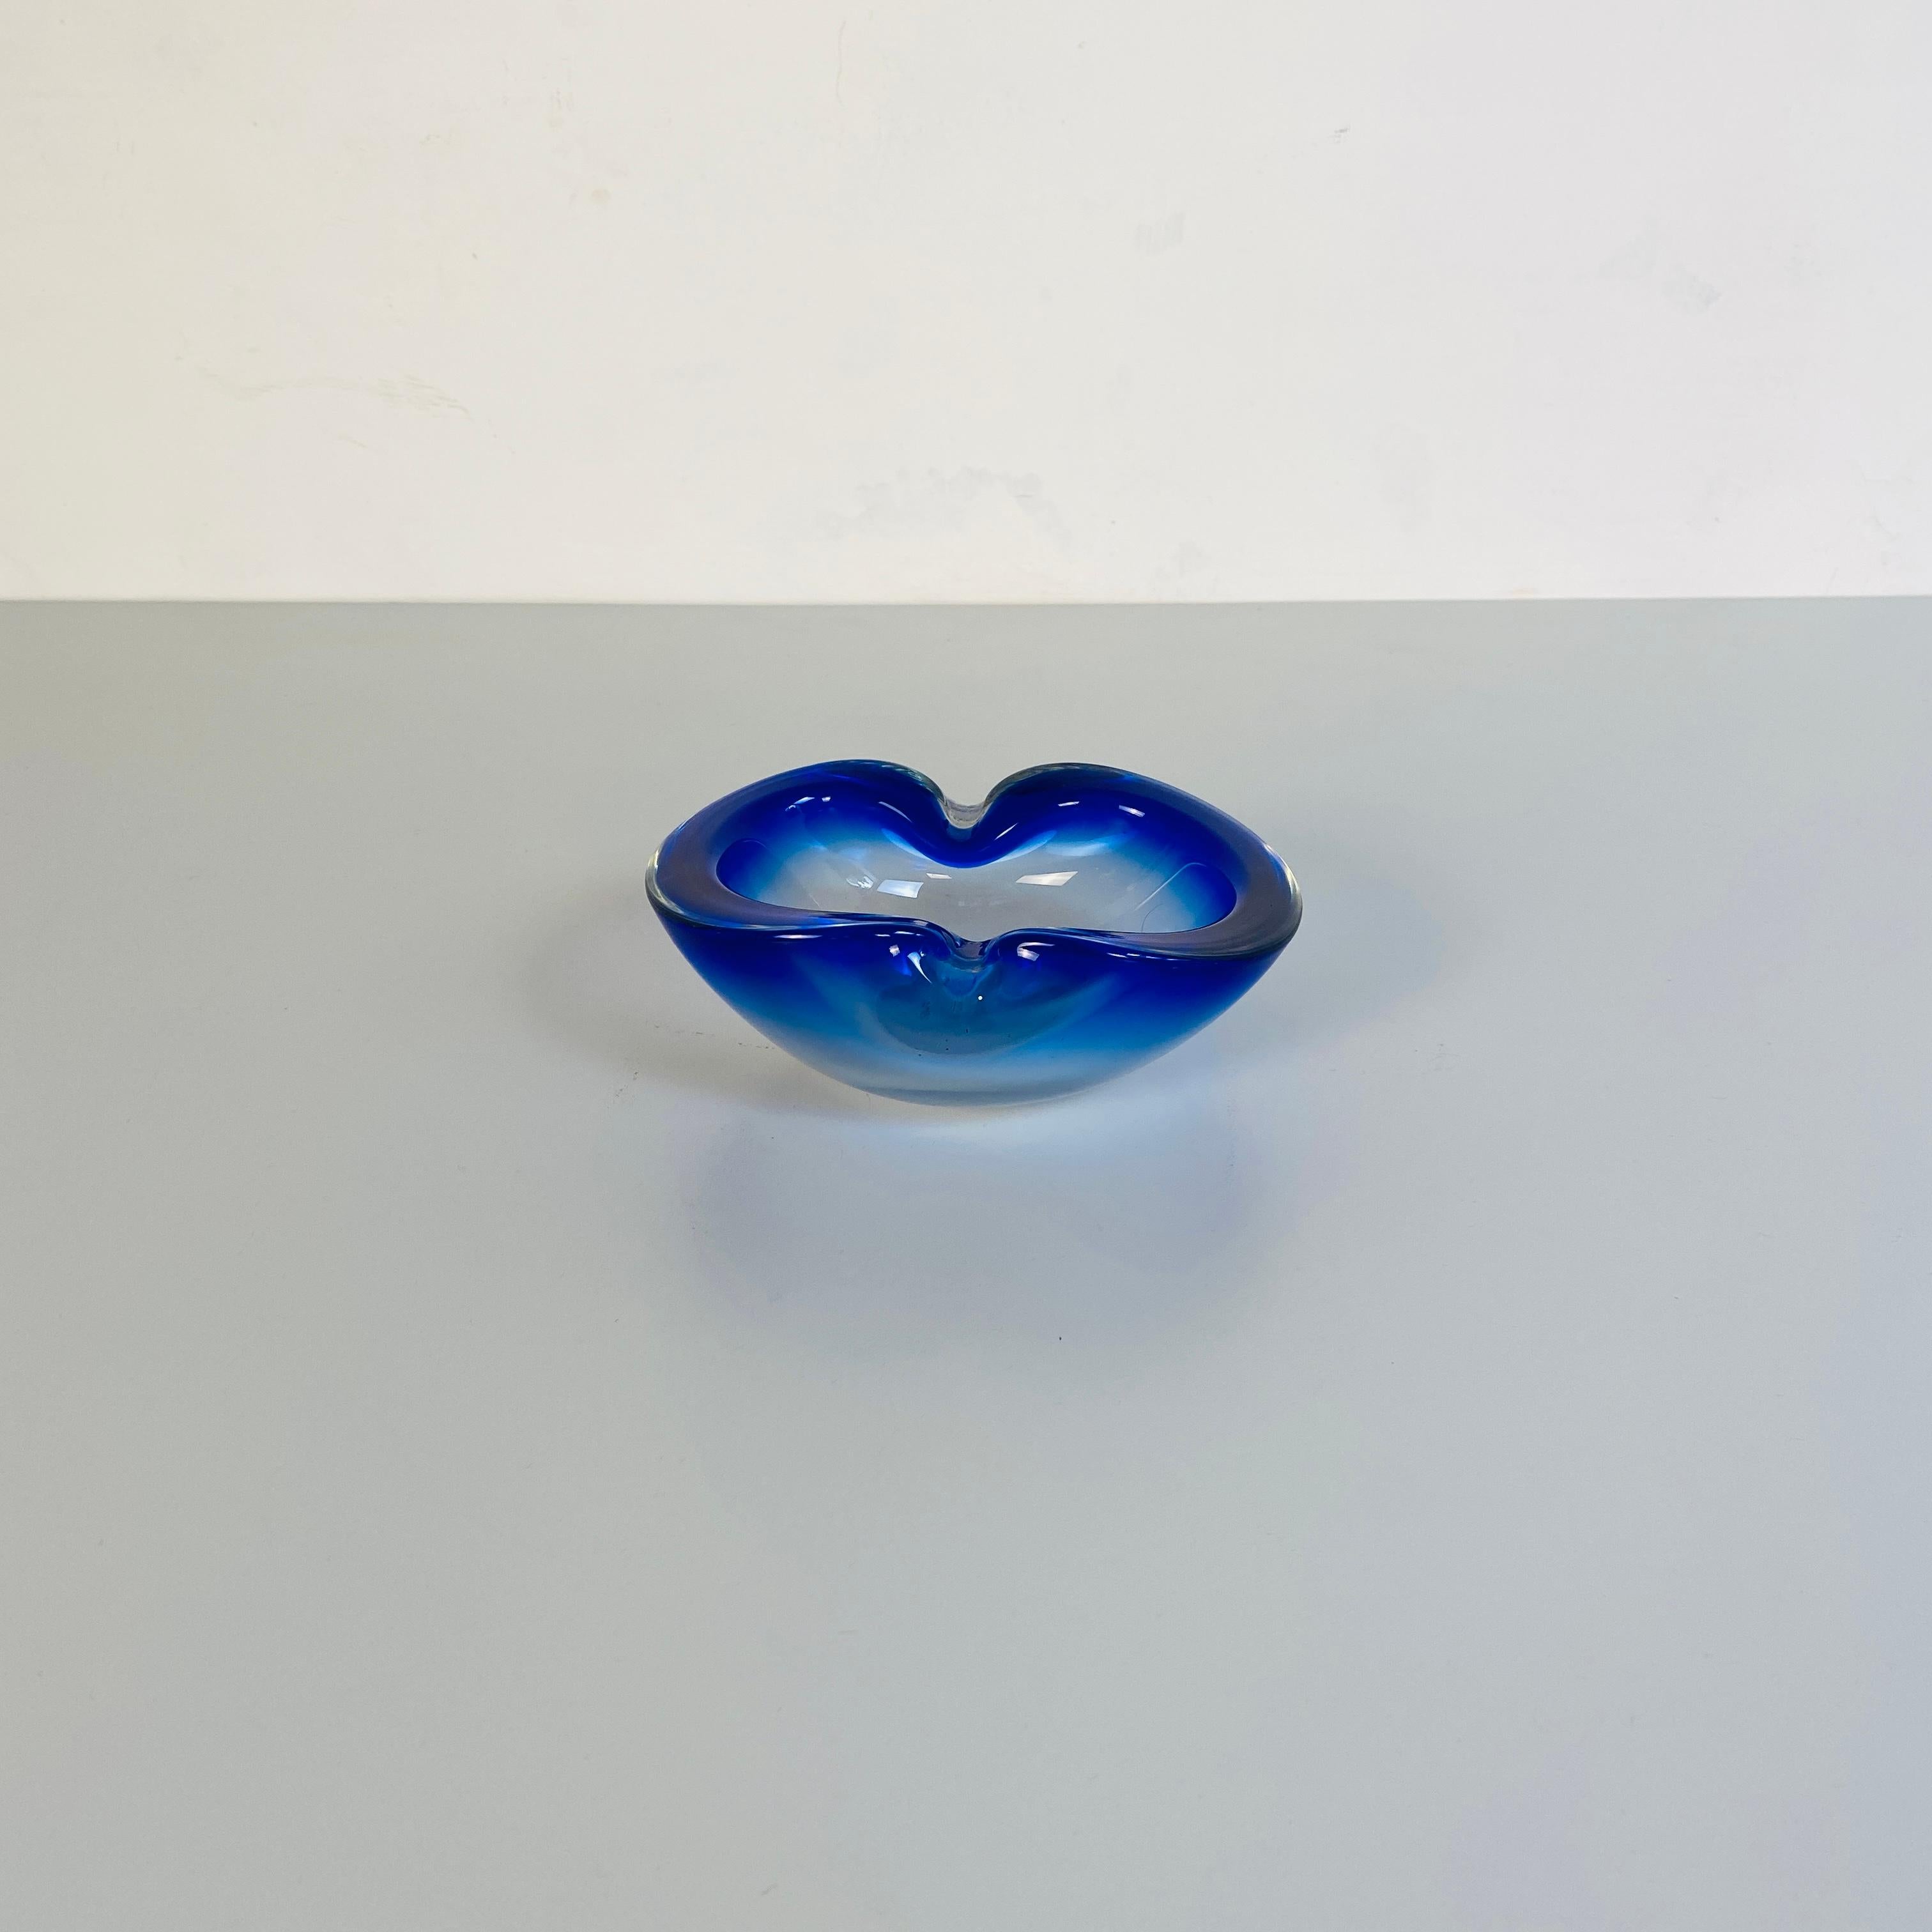 Italian Mid-Century Modern Murano Glass Oval Object Holder in Blue, 1970s For Sale 3